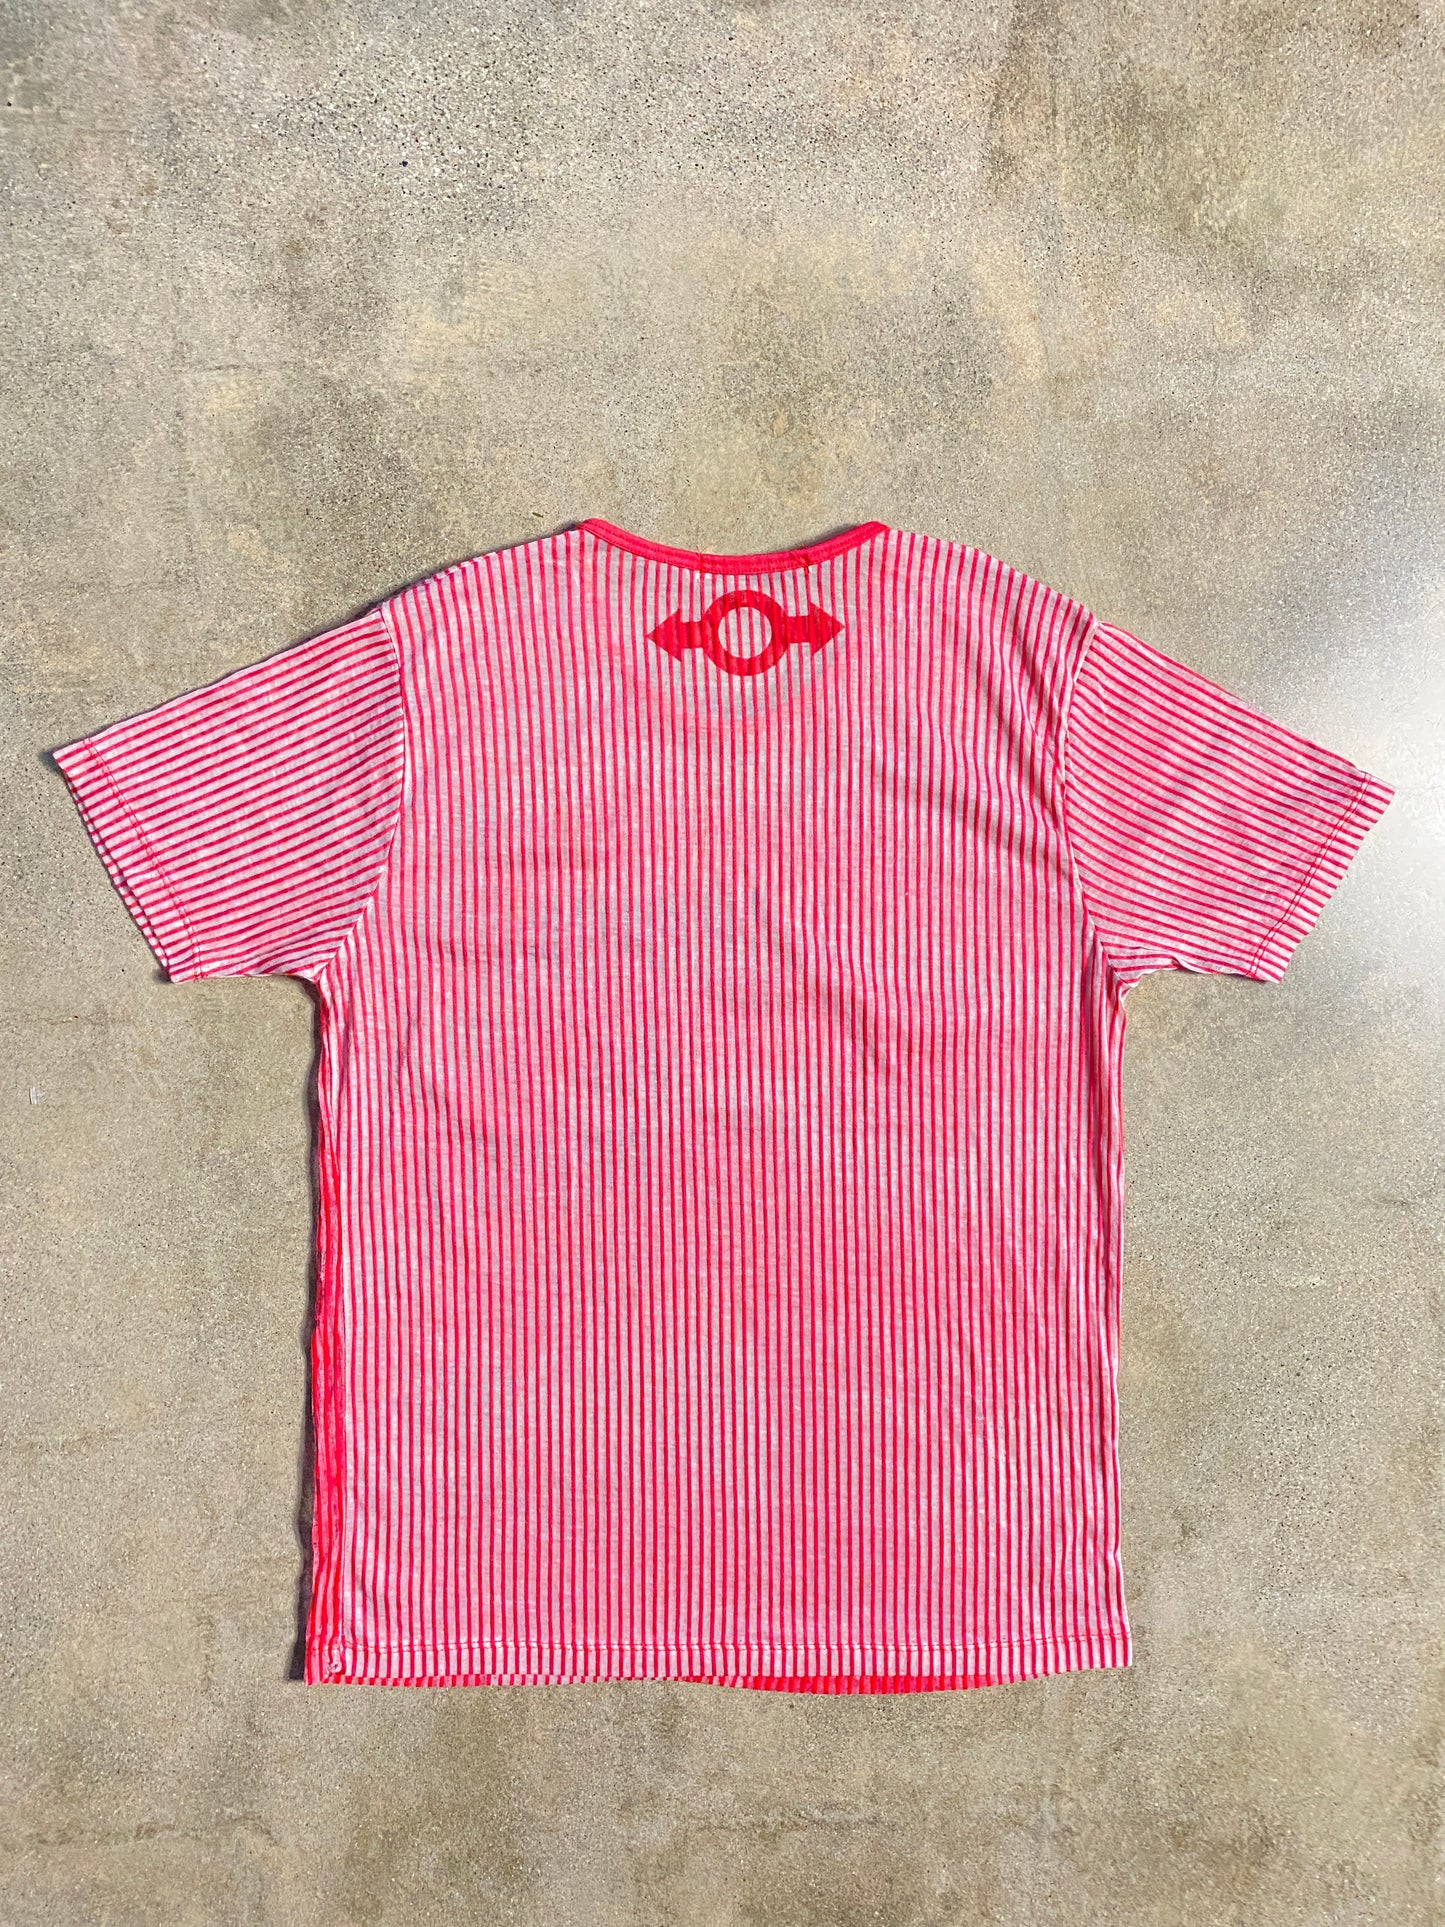 00's Red Sheer Graphic Print Top